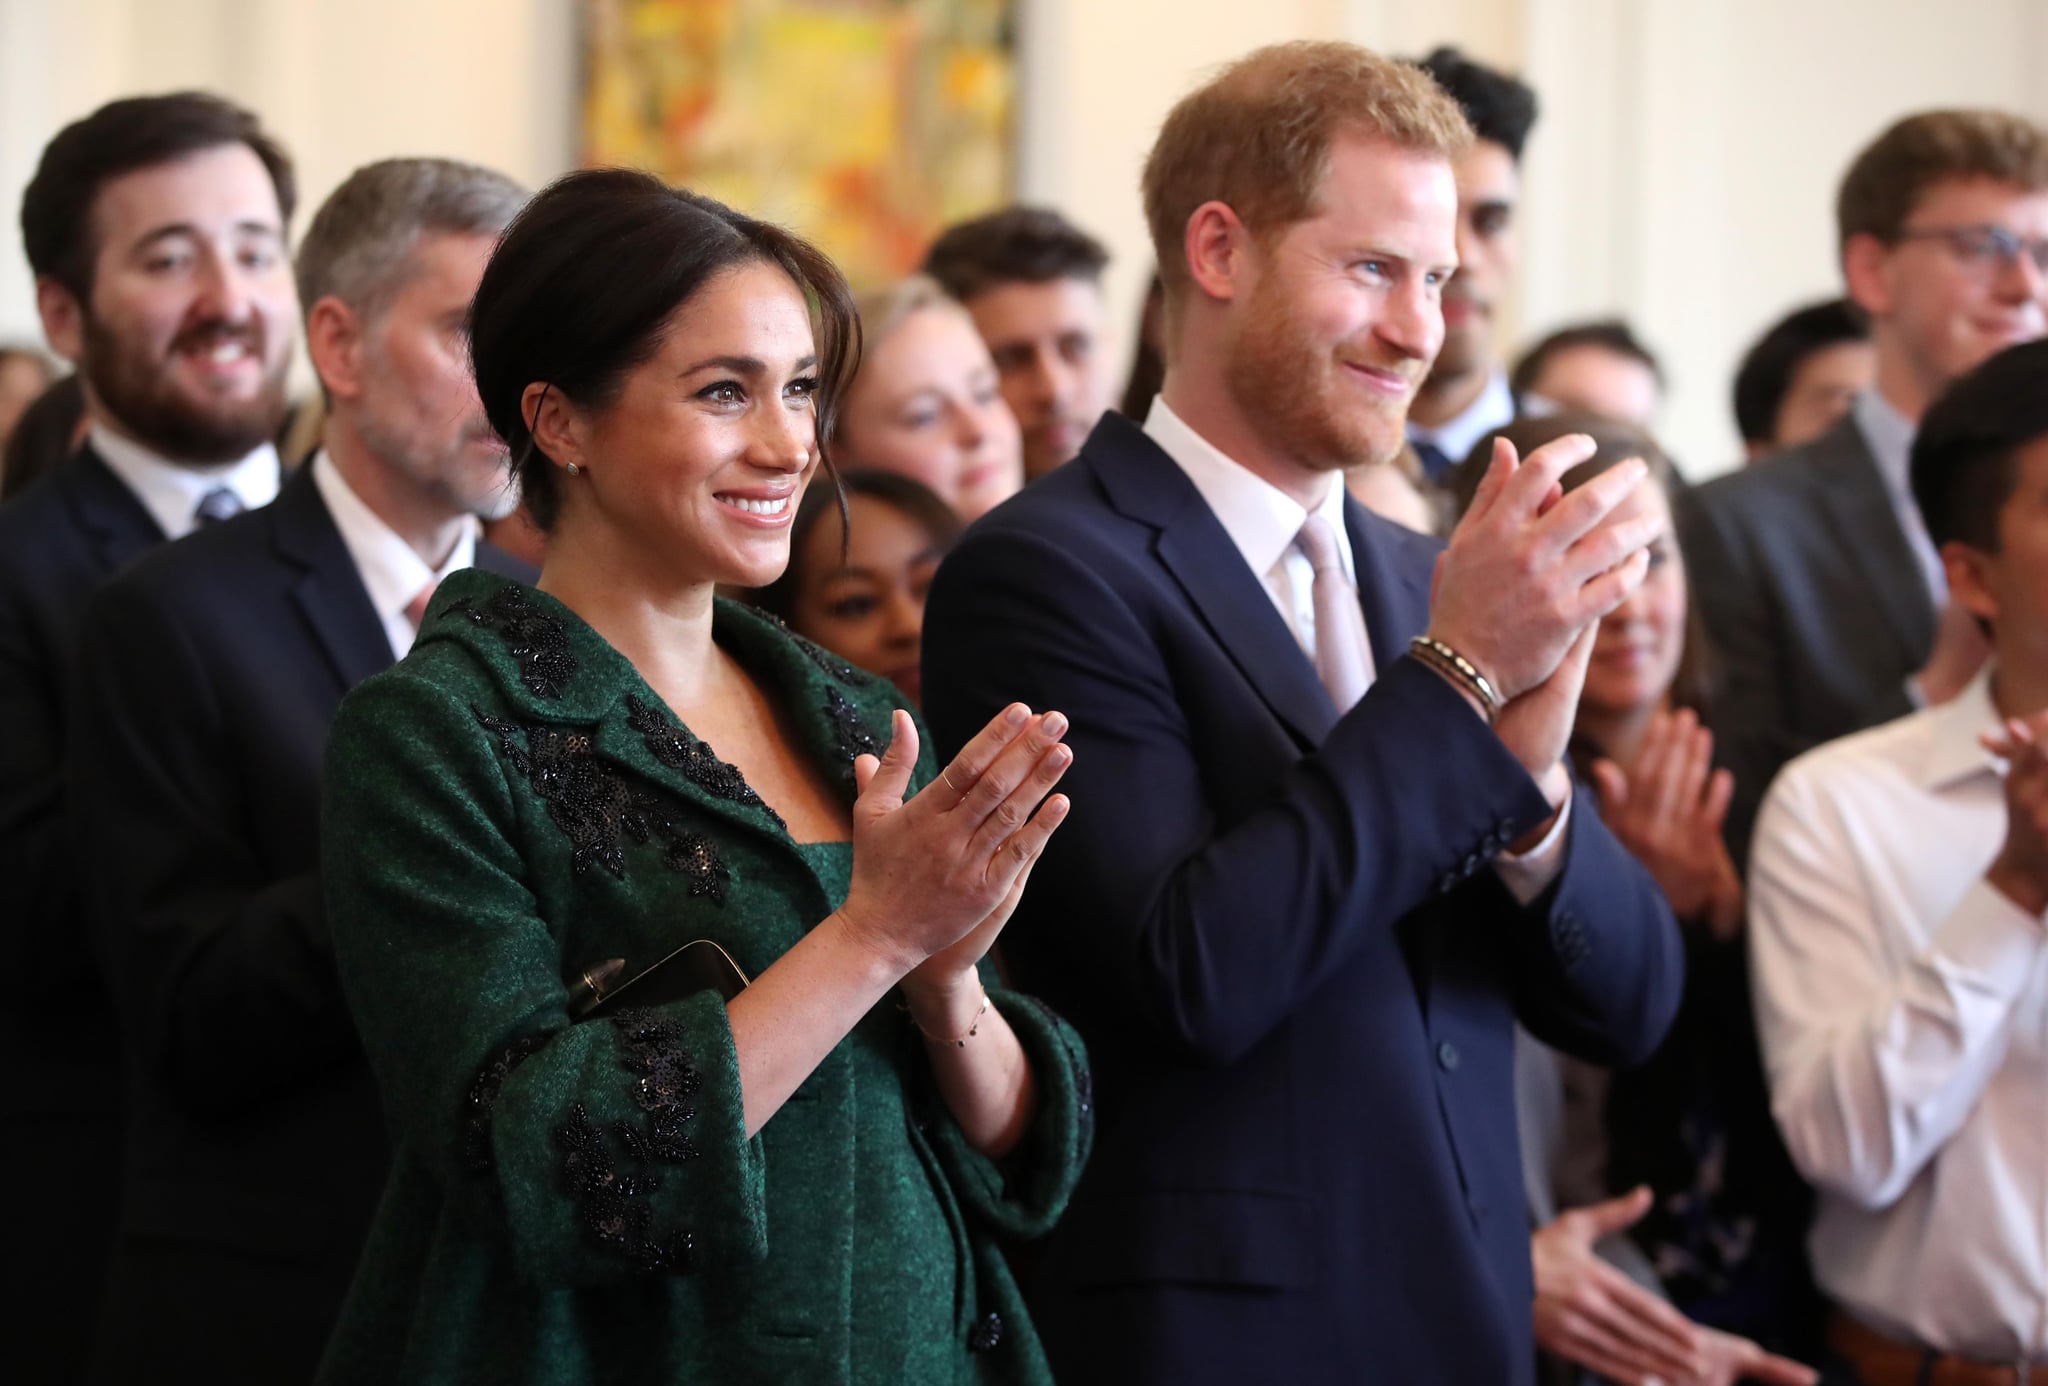 LONDON, ENGLAND - MARCH 11:   Meghan, Duchess of Sussex and Prince Harry, Duke of Sussex watch a musical performance as they attend a Commonwealth Day Youth Event at Canada House on March 11, 2019 in London, England. The event will showcase and celebrate the diverse community of young Canadians living in London and around the UK. (Photo by Chris Jackson - WPA Pool/Getty Images)